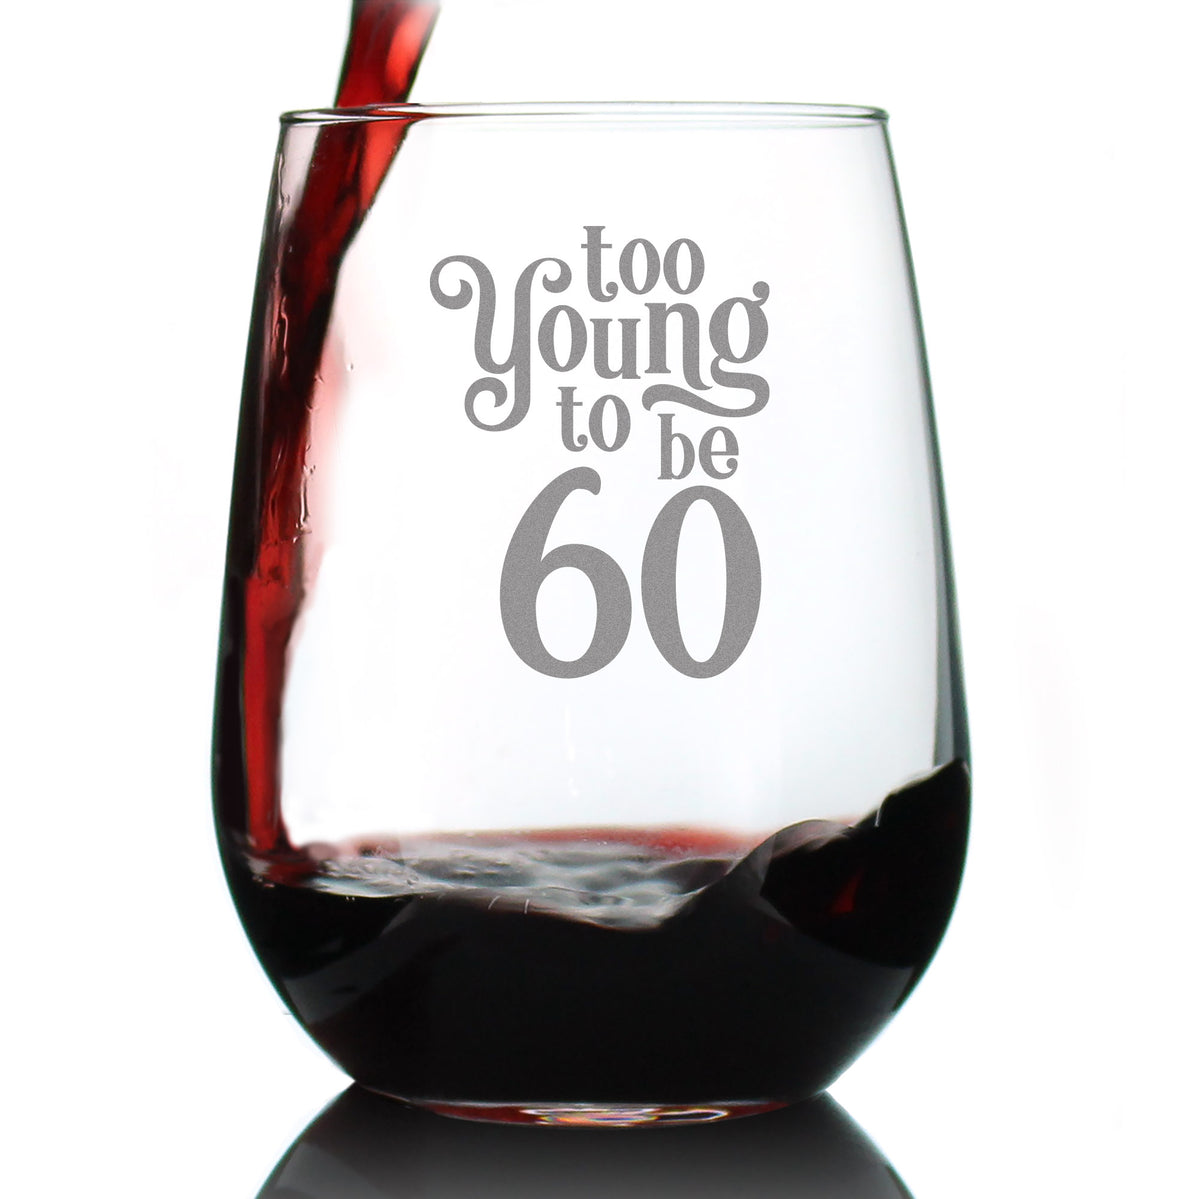 Too Young to Be 60 - Funny 60th Birthday Wine Glass for Women Turning 60 - Large 17 Oz - Bday Party Decorations